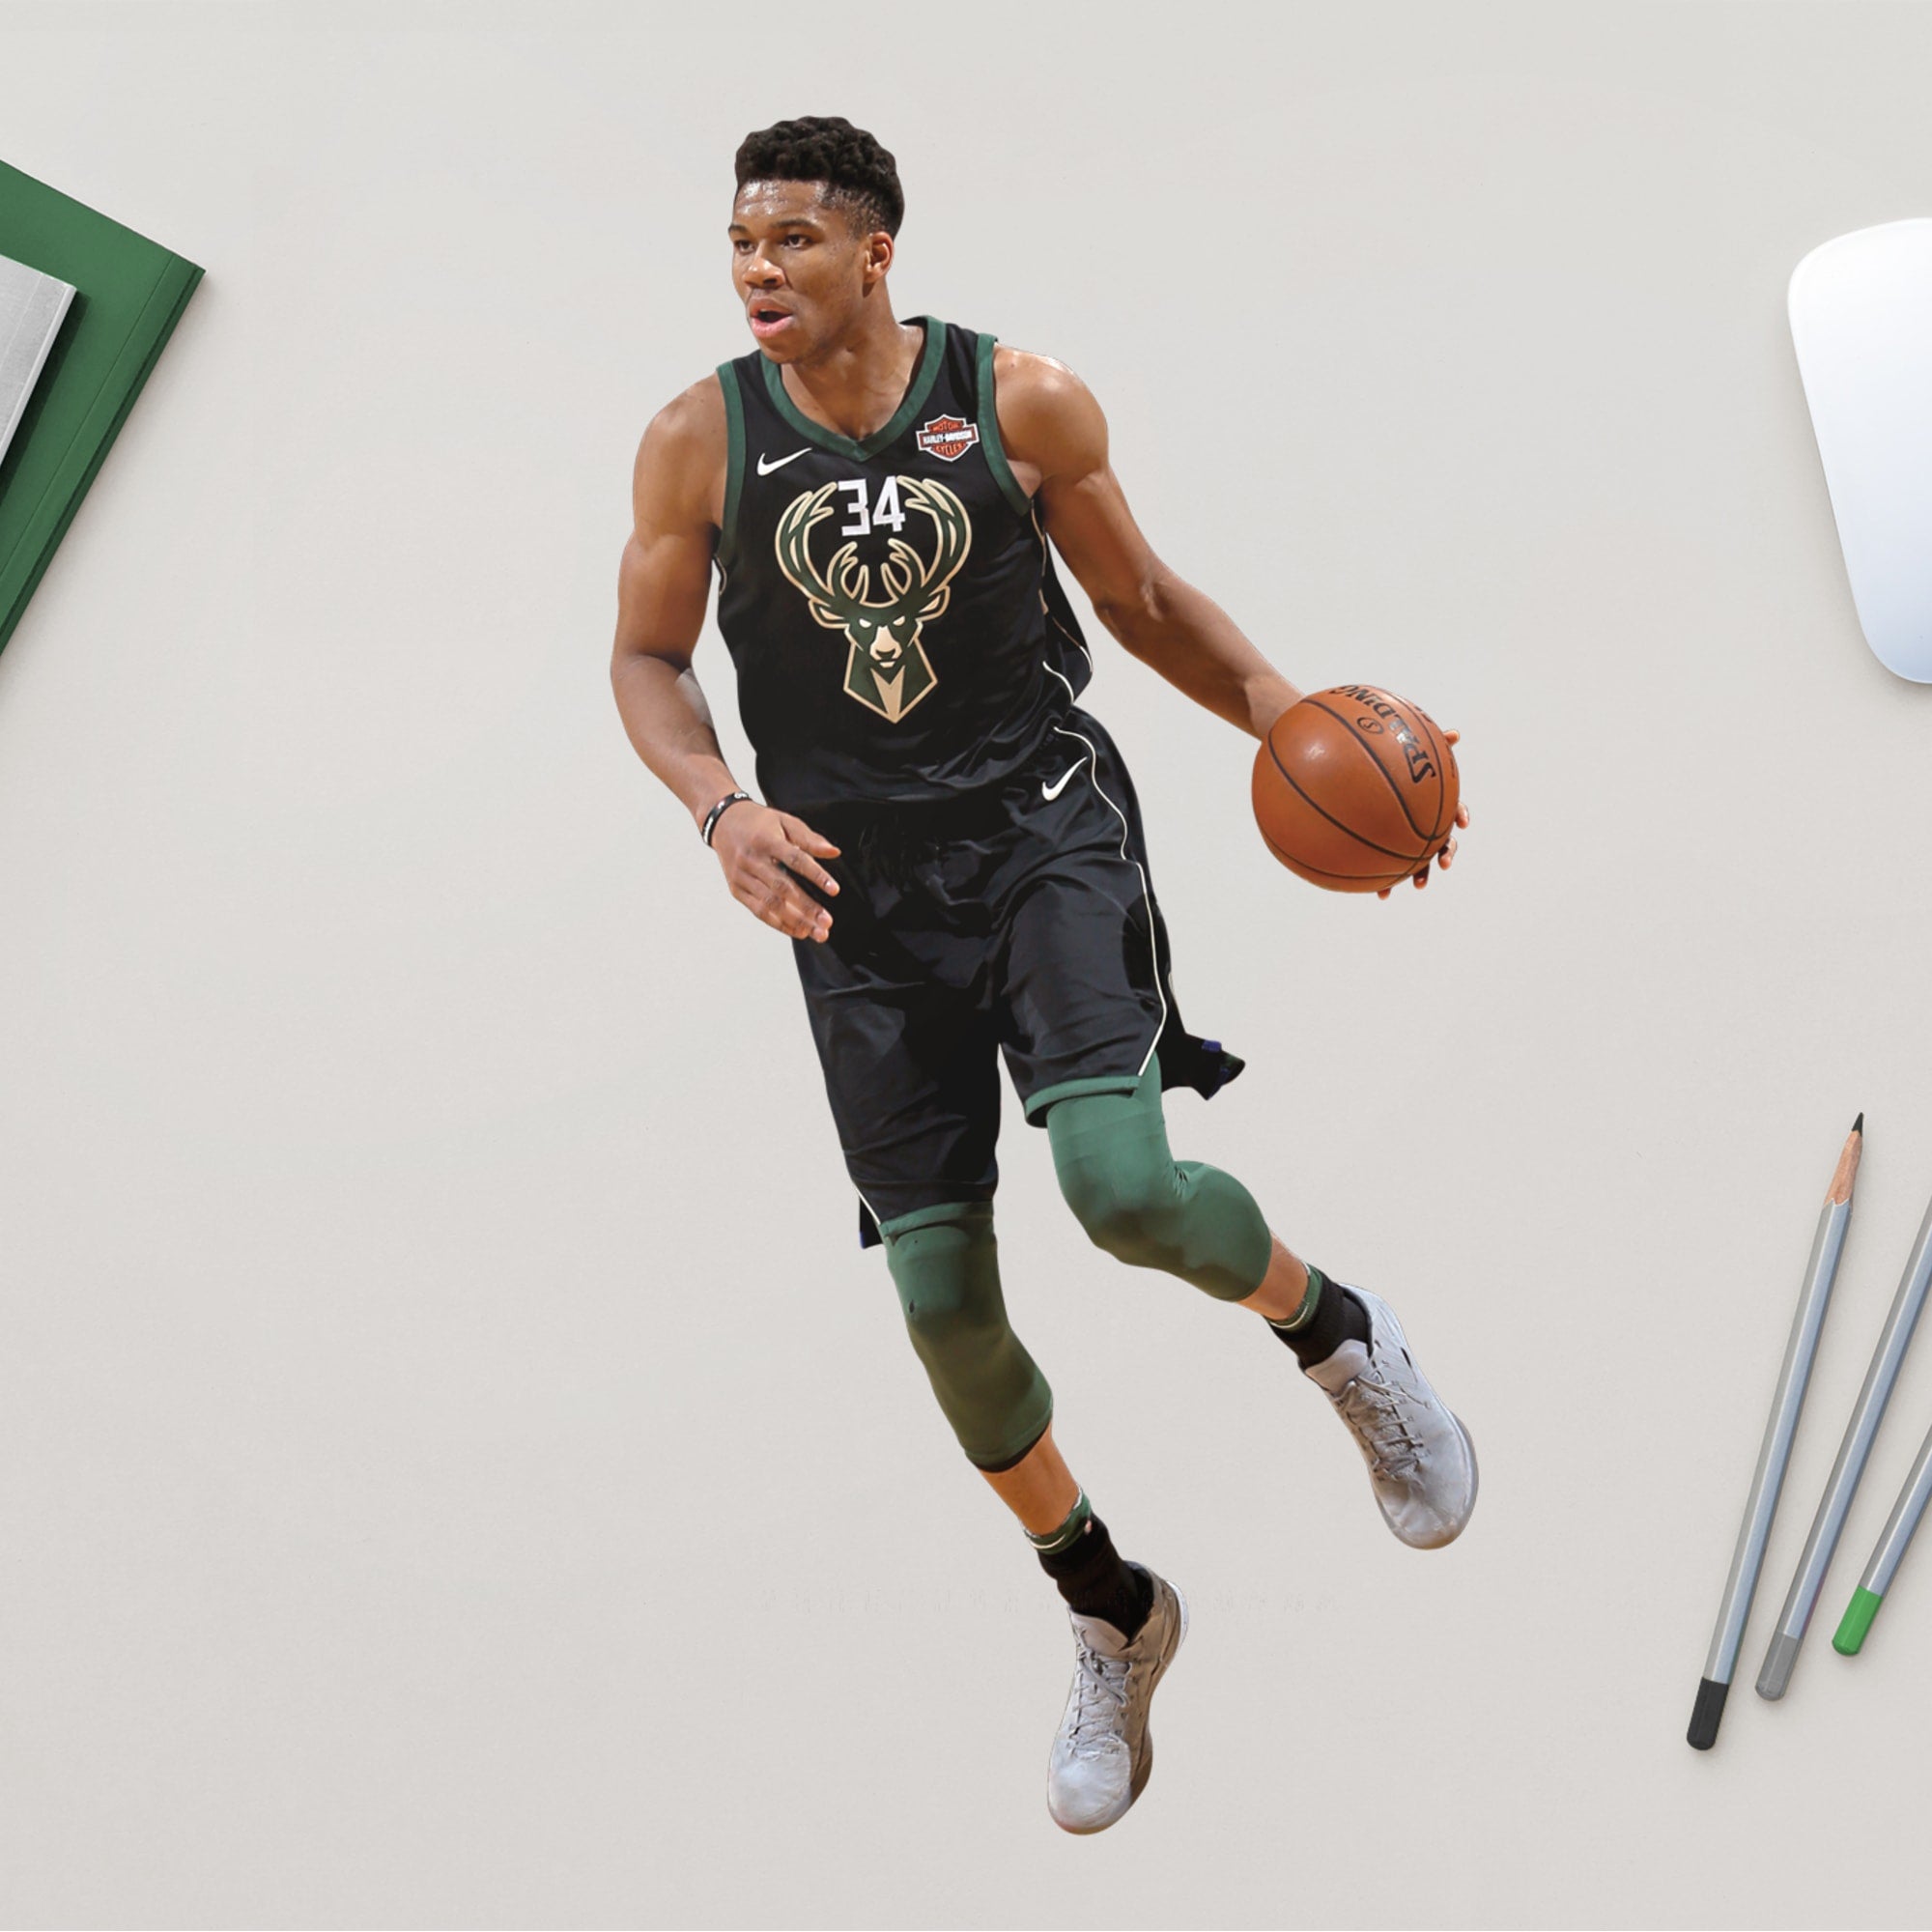 Giannis Antetokounmpo for Milwaukee Bucks - Officially Licensed NBA Removable Wall Decal 8.0"W x 17.0"H by Fathead | Vinyl